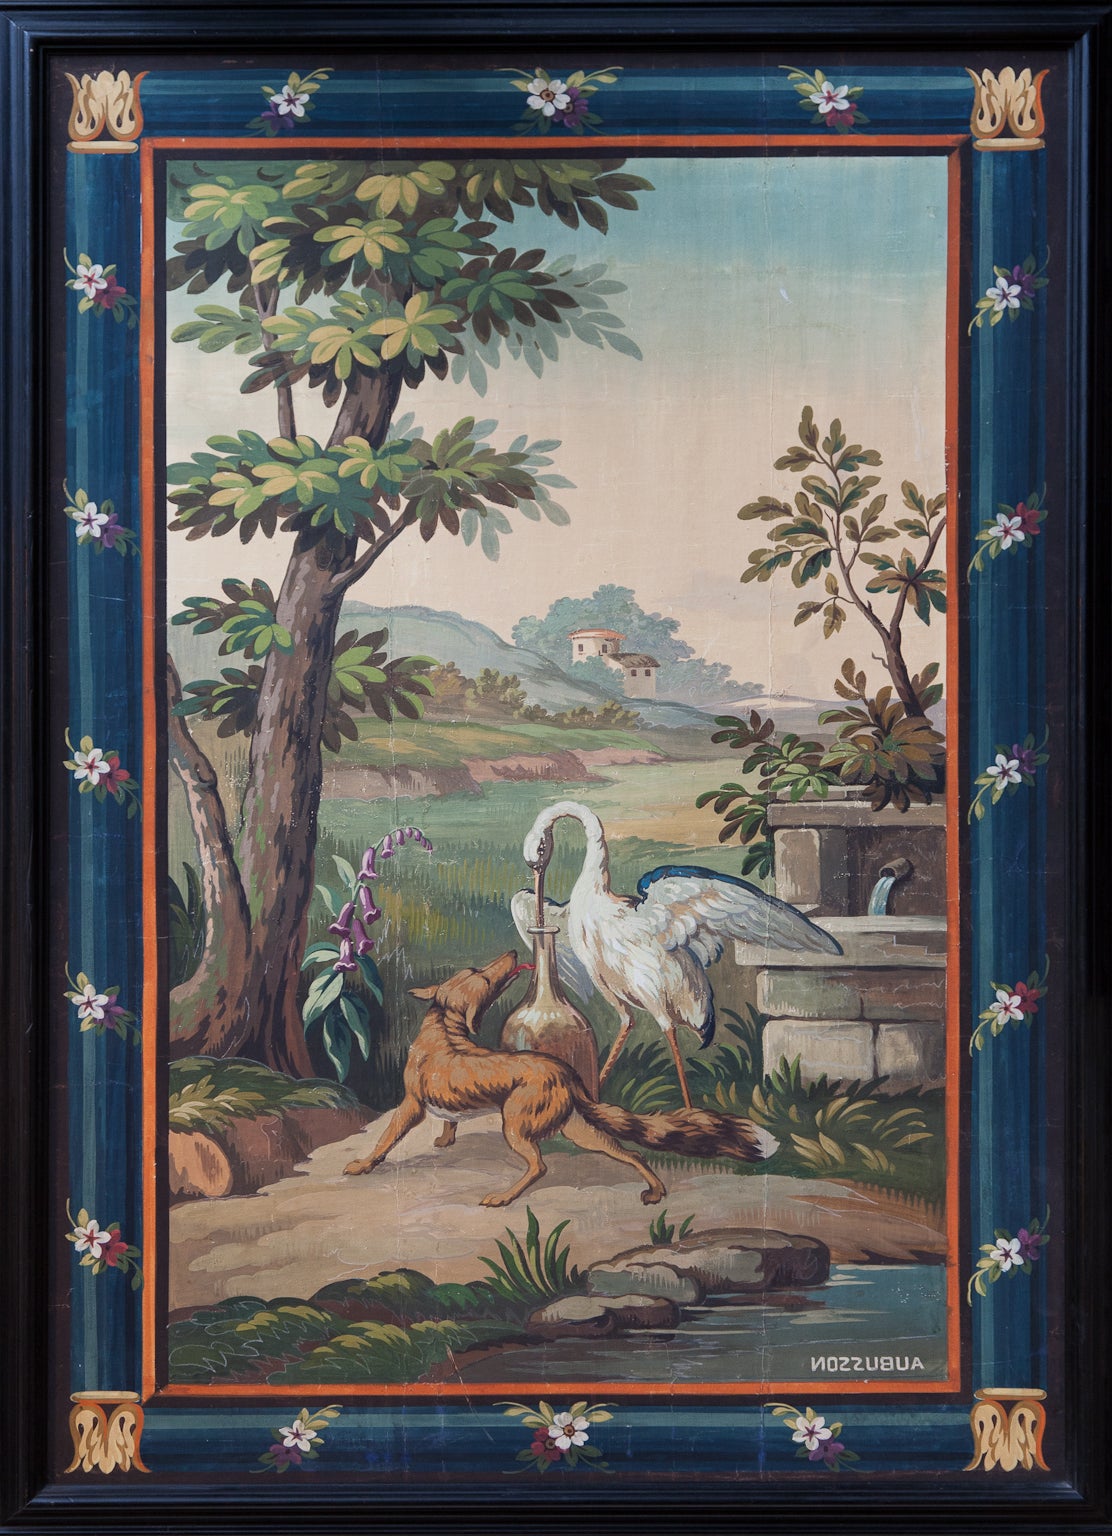 Framed Aubusson Tapestry Cartoon Of The Fable 'The Stork And The Fox' C. 1880 For Sale